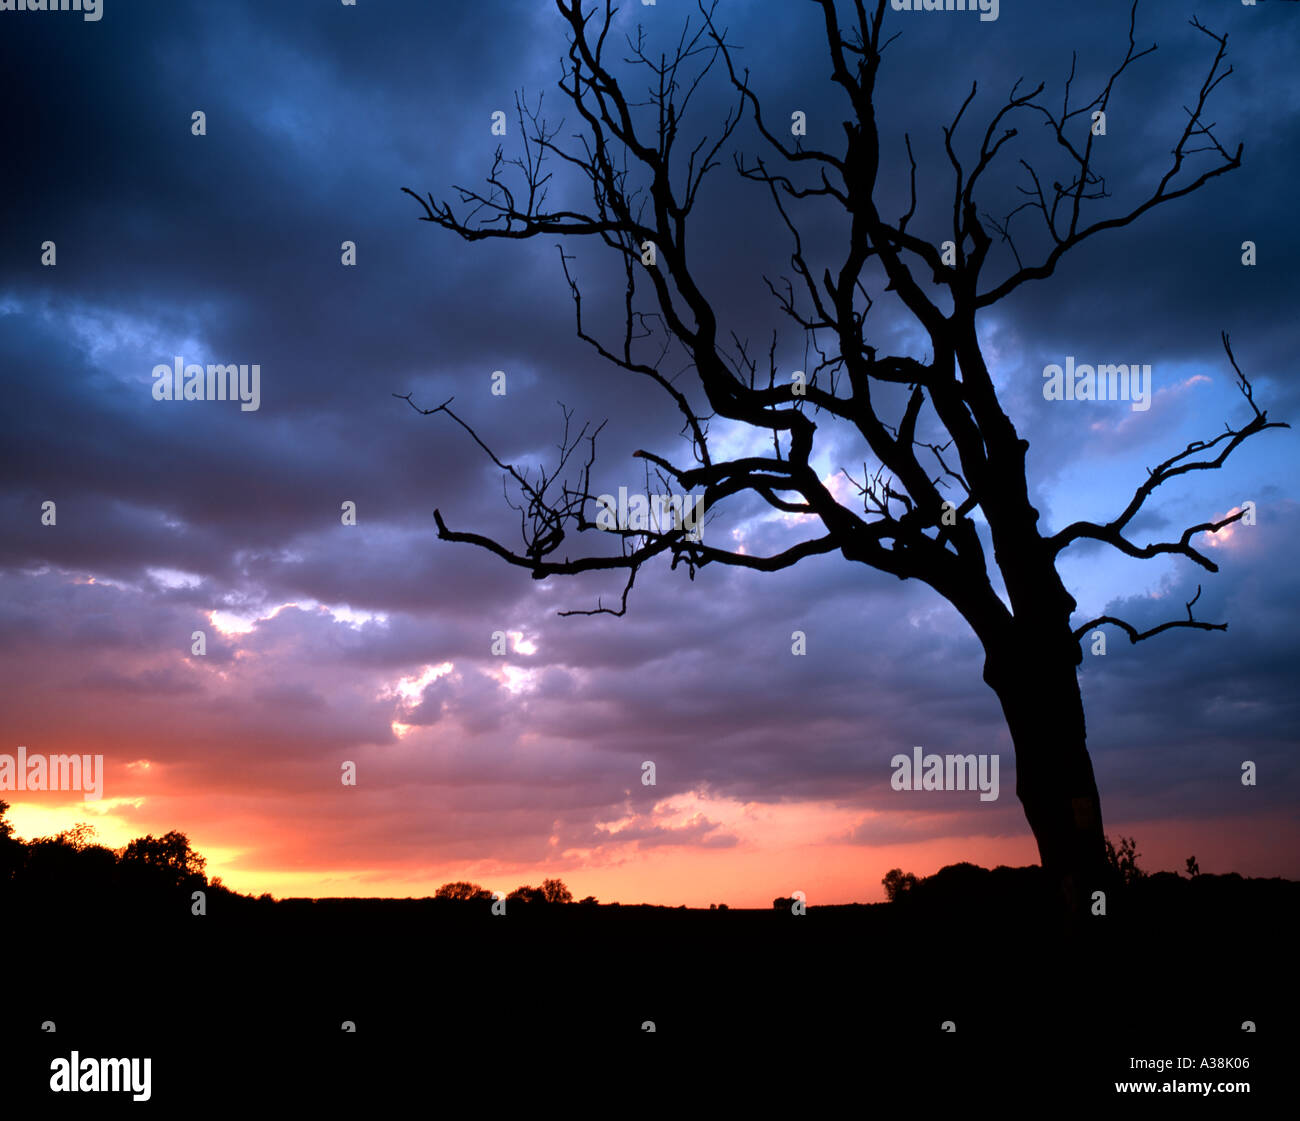 Silhouette Of A Dead Oak Tree Against A Stunning Sunset Kent England Stock Photo Alamy